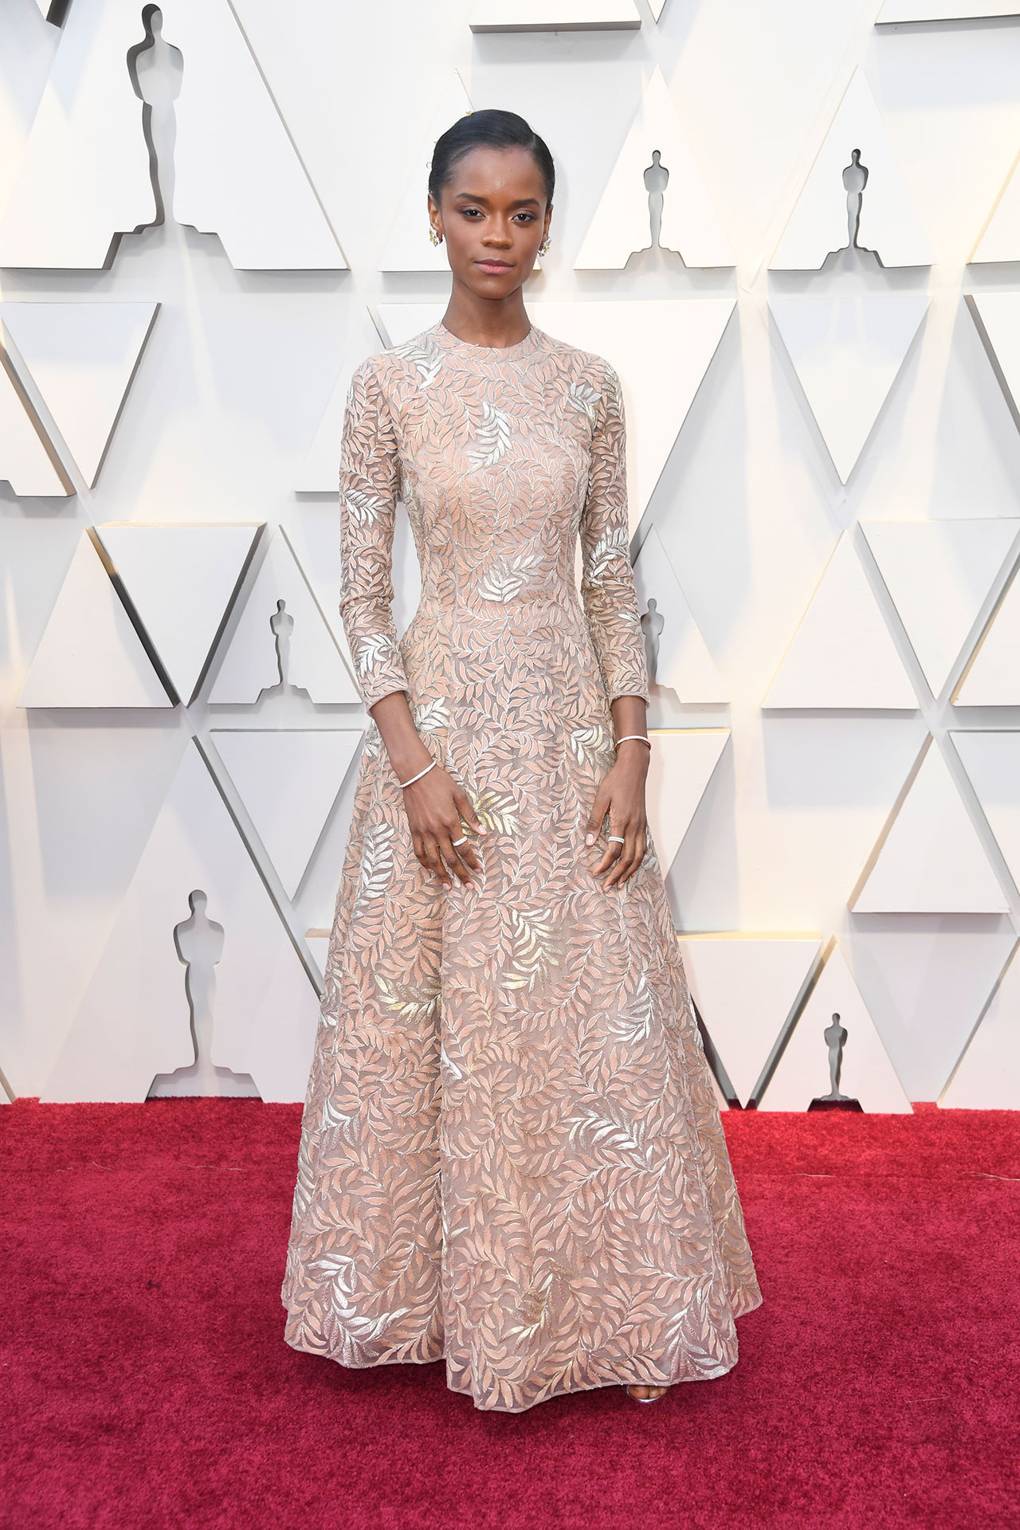 Oscars Best Dressed 2019 - Letitia Wright in Dior Couture